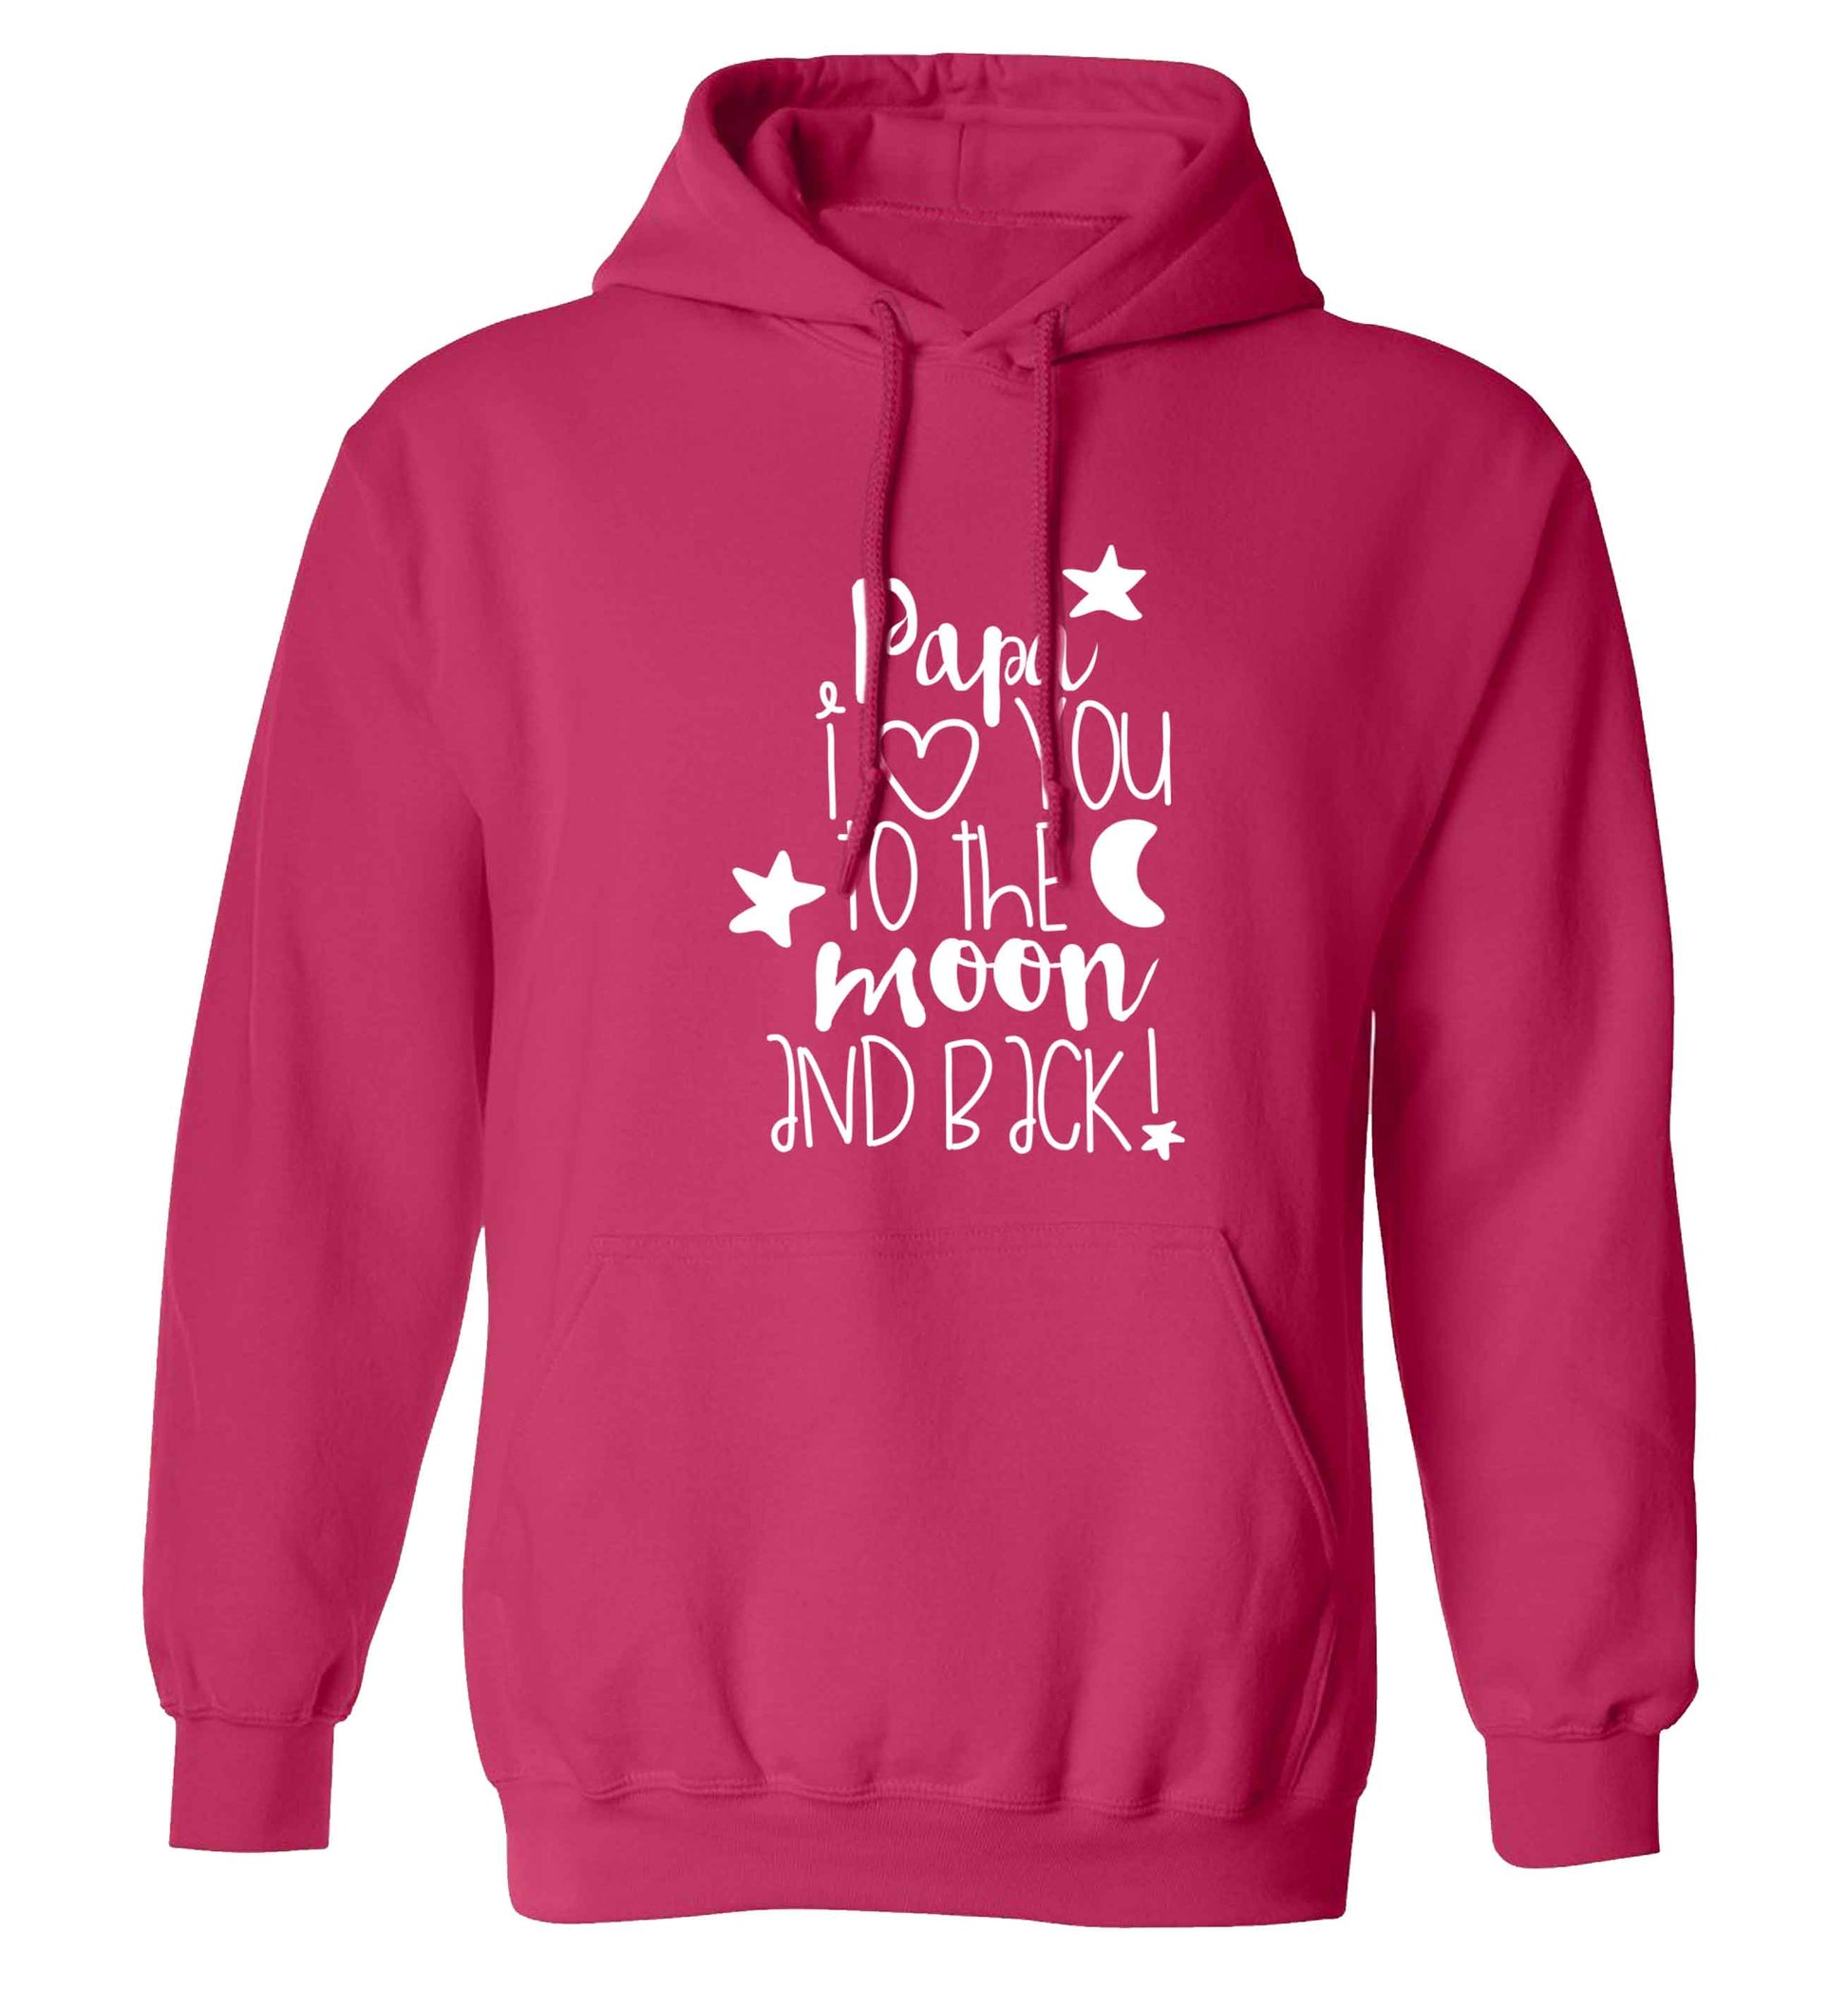 Papa I love you to the moon and back adults unisex pink hoodie 2XL